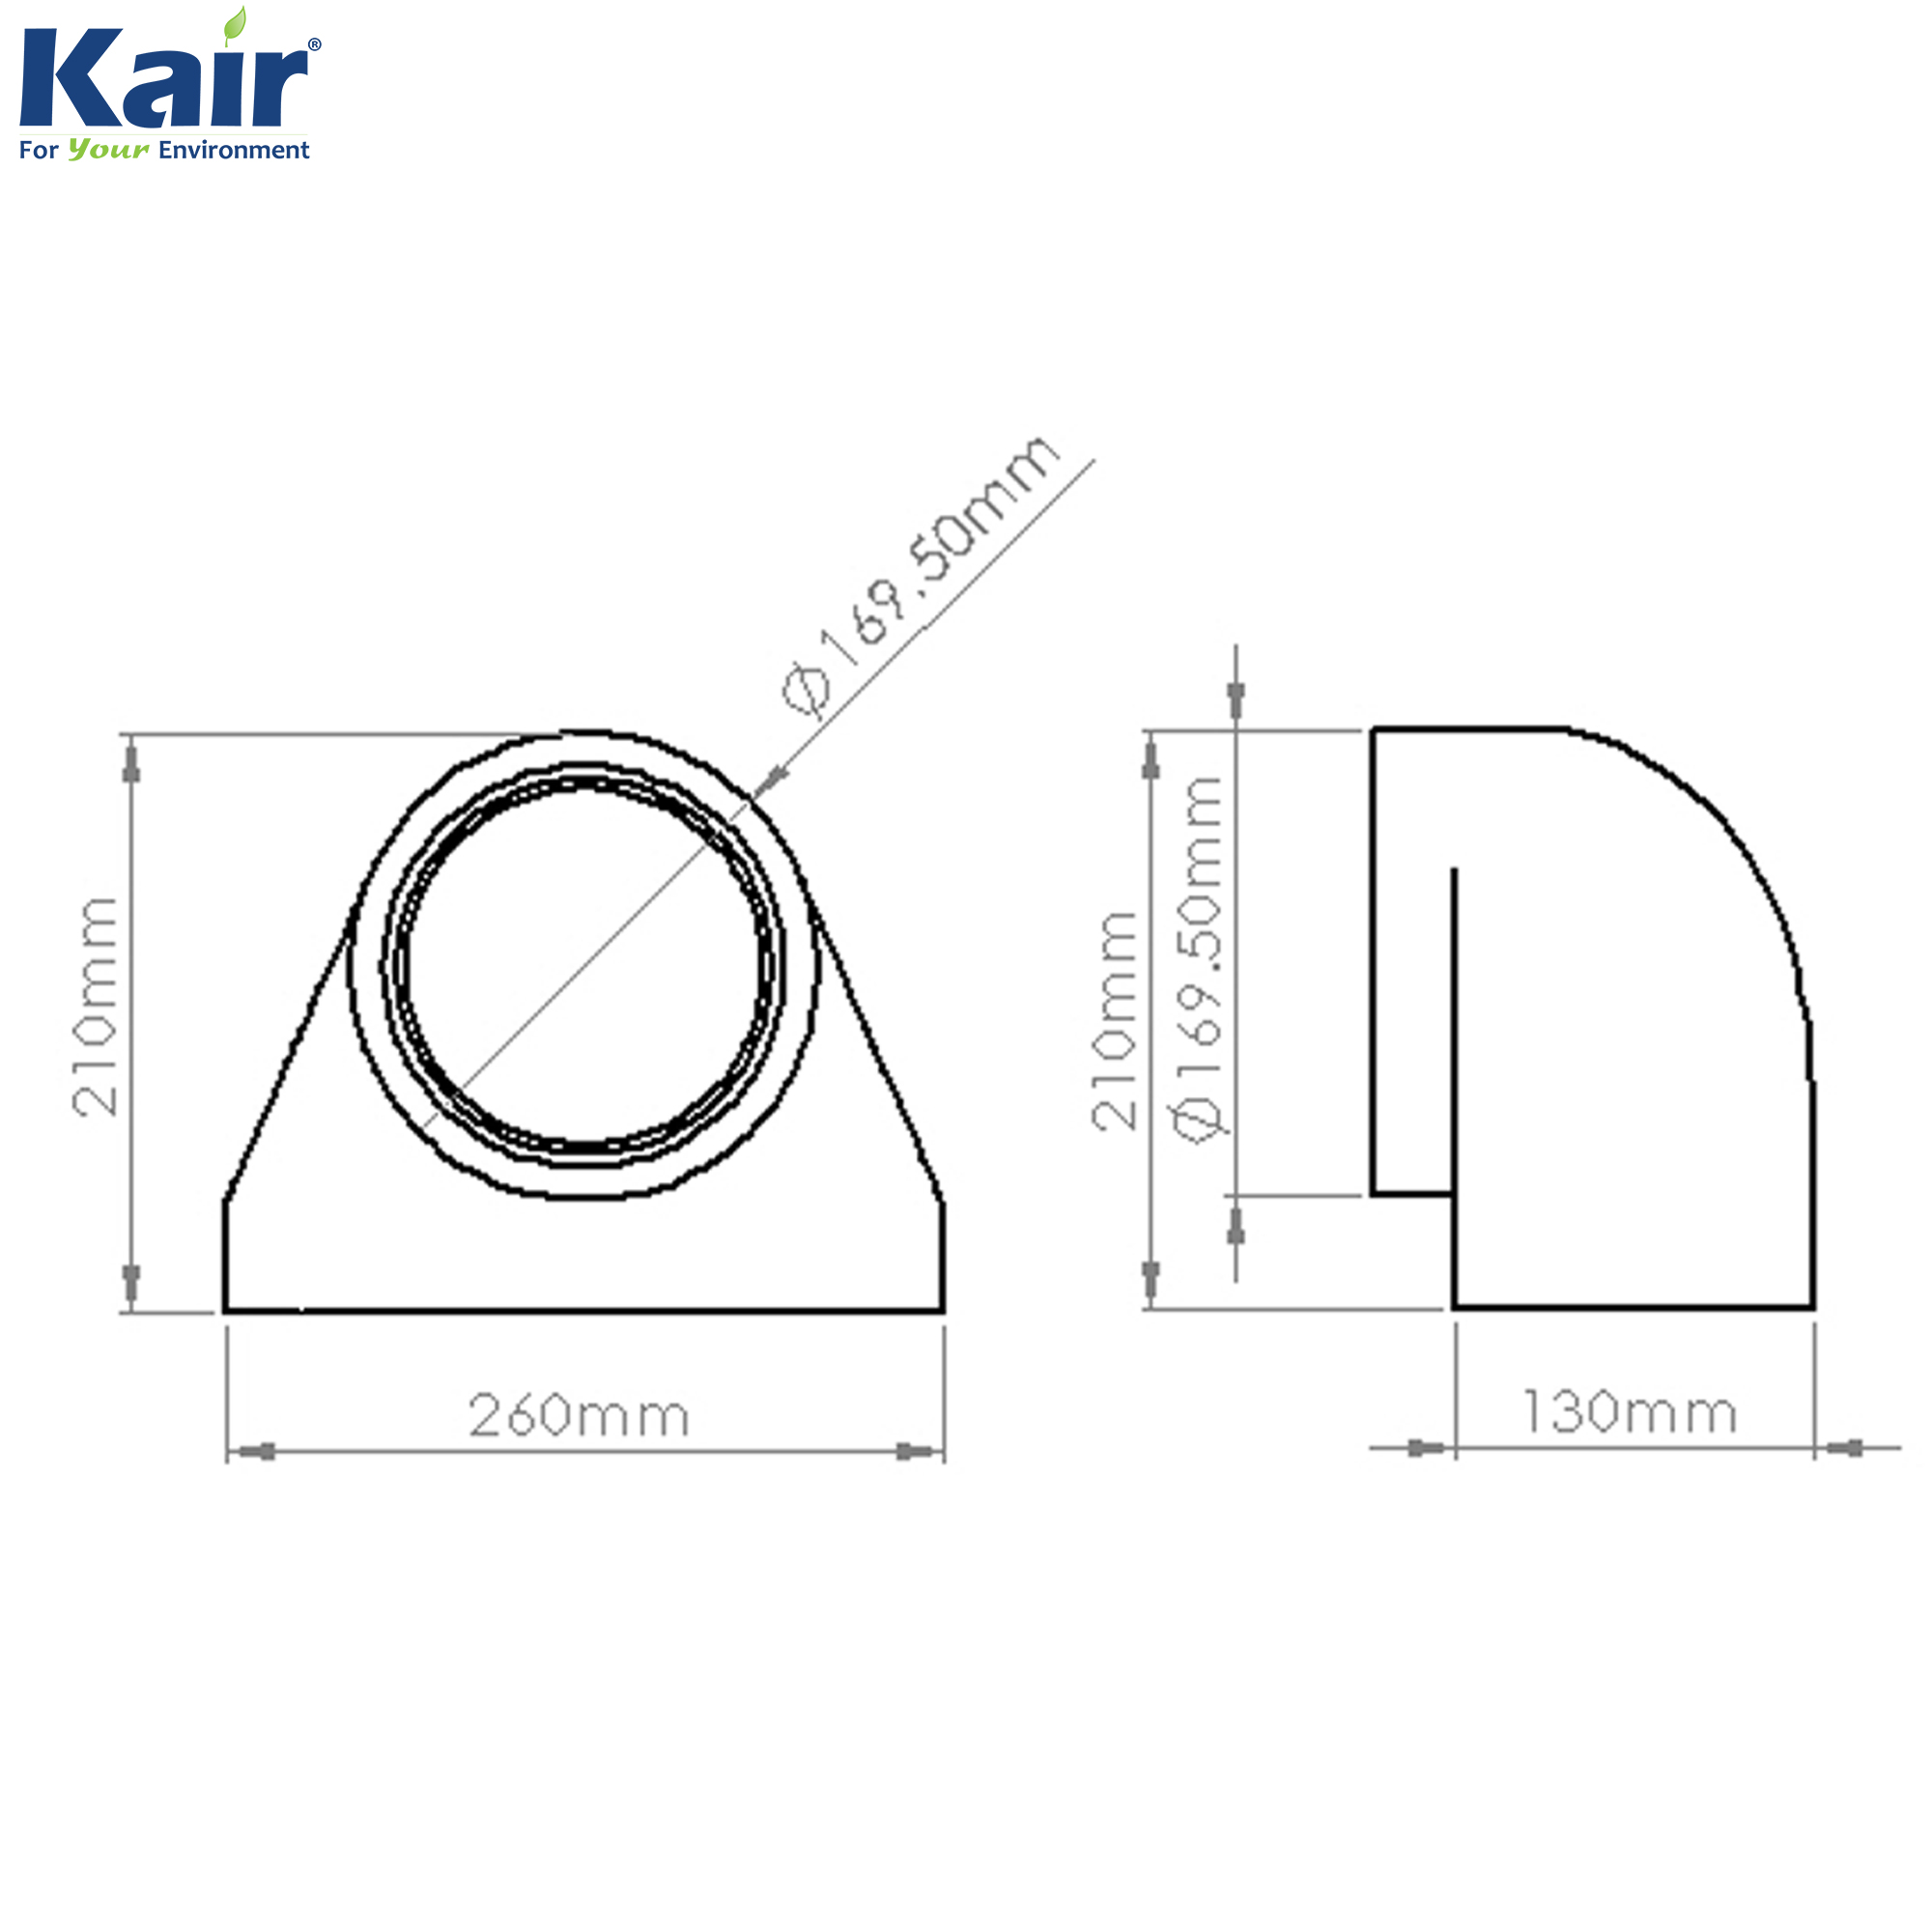 Box of 6 x Kair Self-Seal Thermal Ducting 220X90mm To 125mm Dia Plenums With Female Click & Lock Fittings